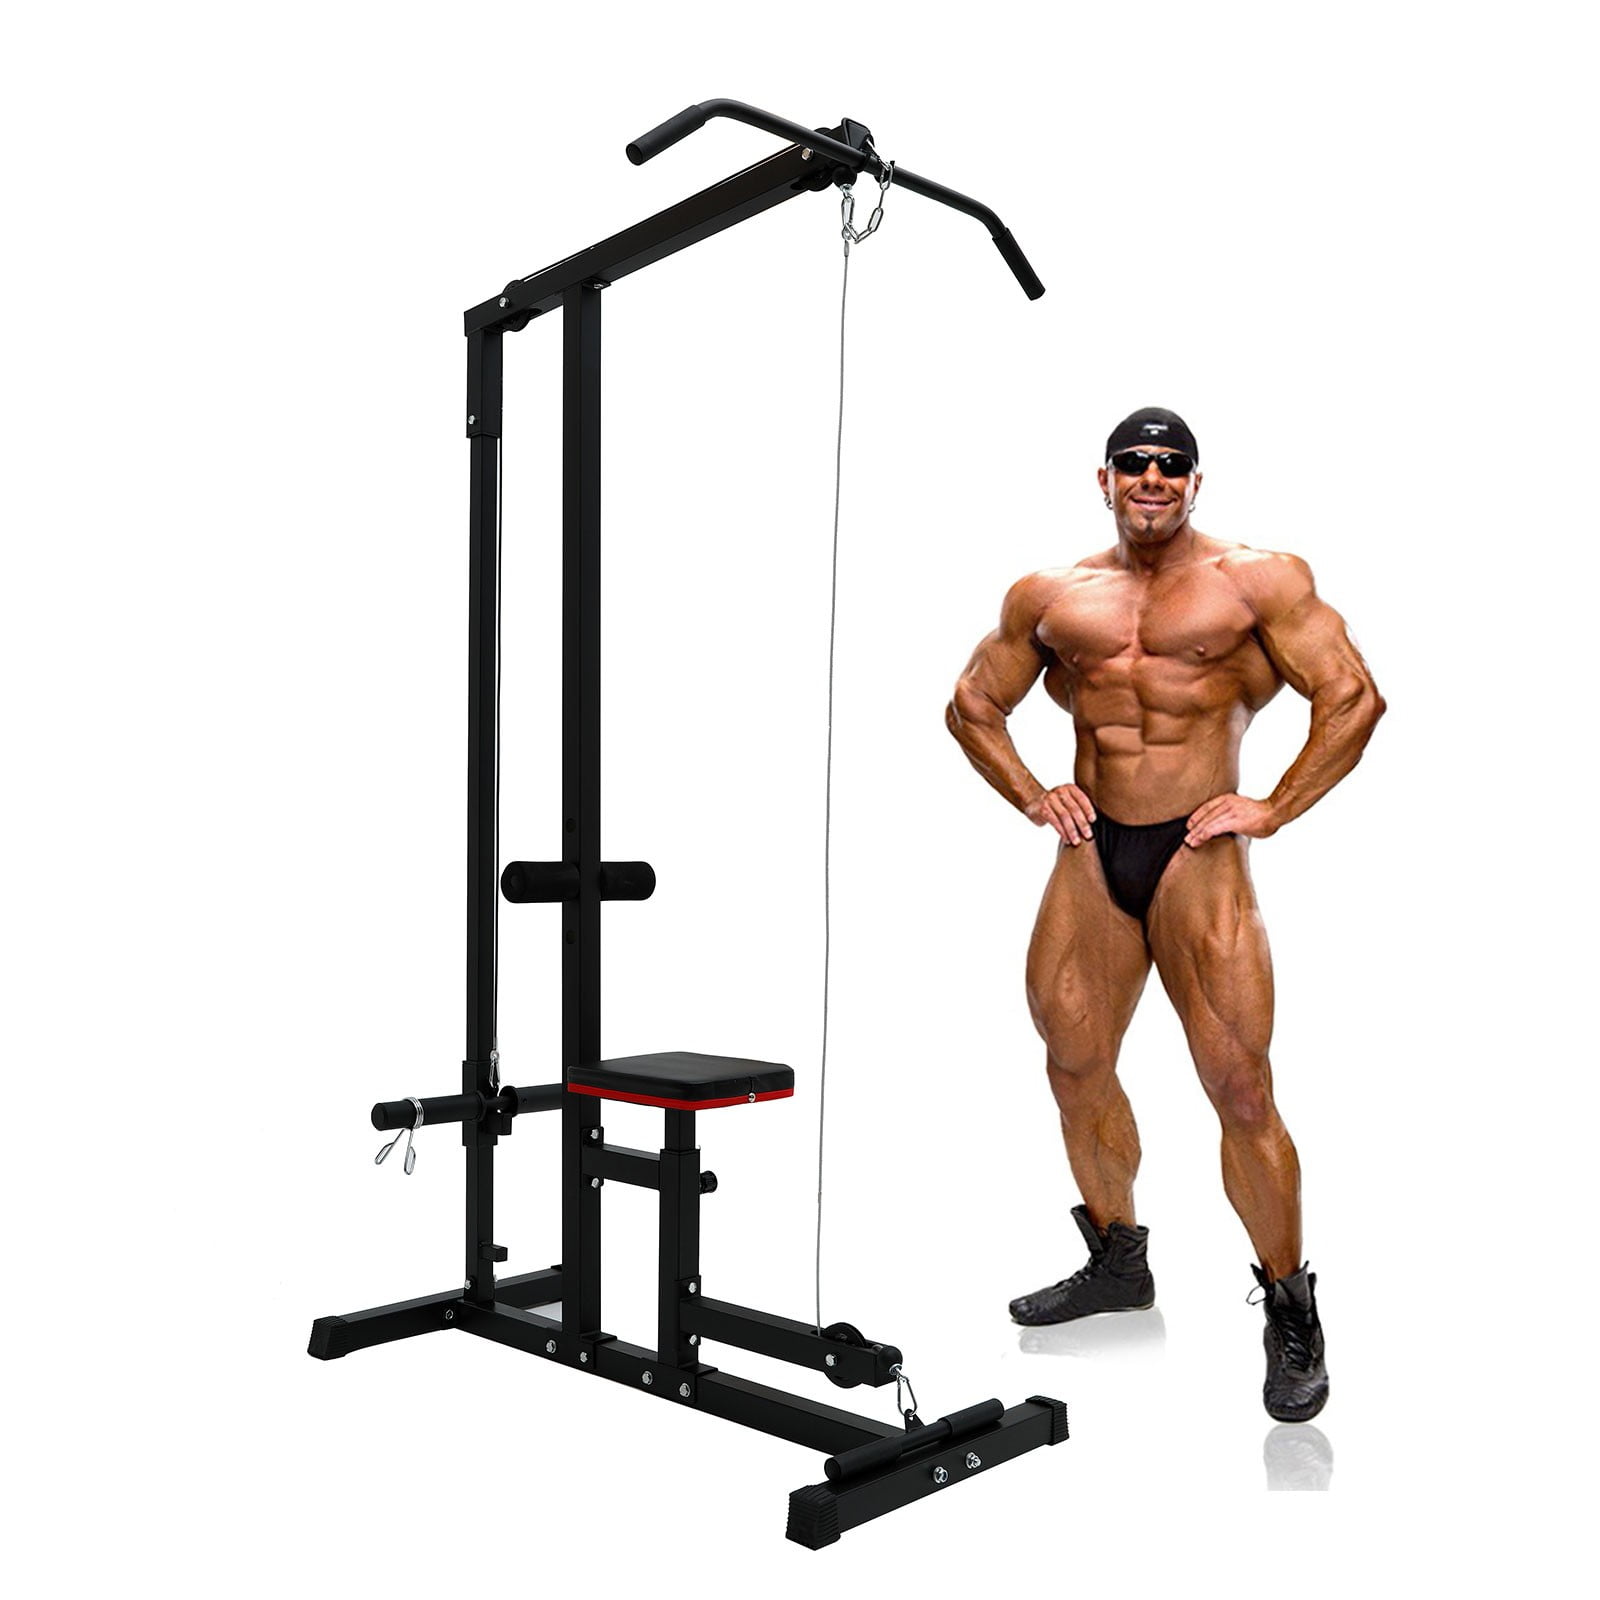 Full-Set-Body-Building-Barbells-Lat-Pulldown-Home-Workout-Cable-Pulley-Multi-Gym 